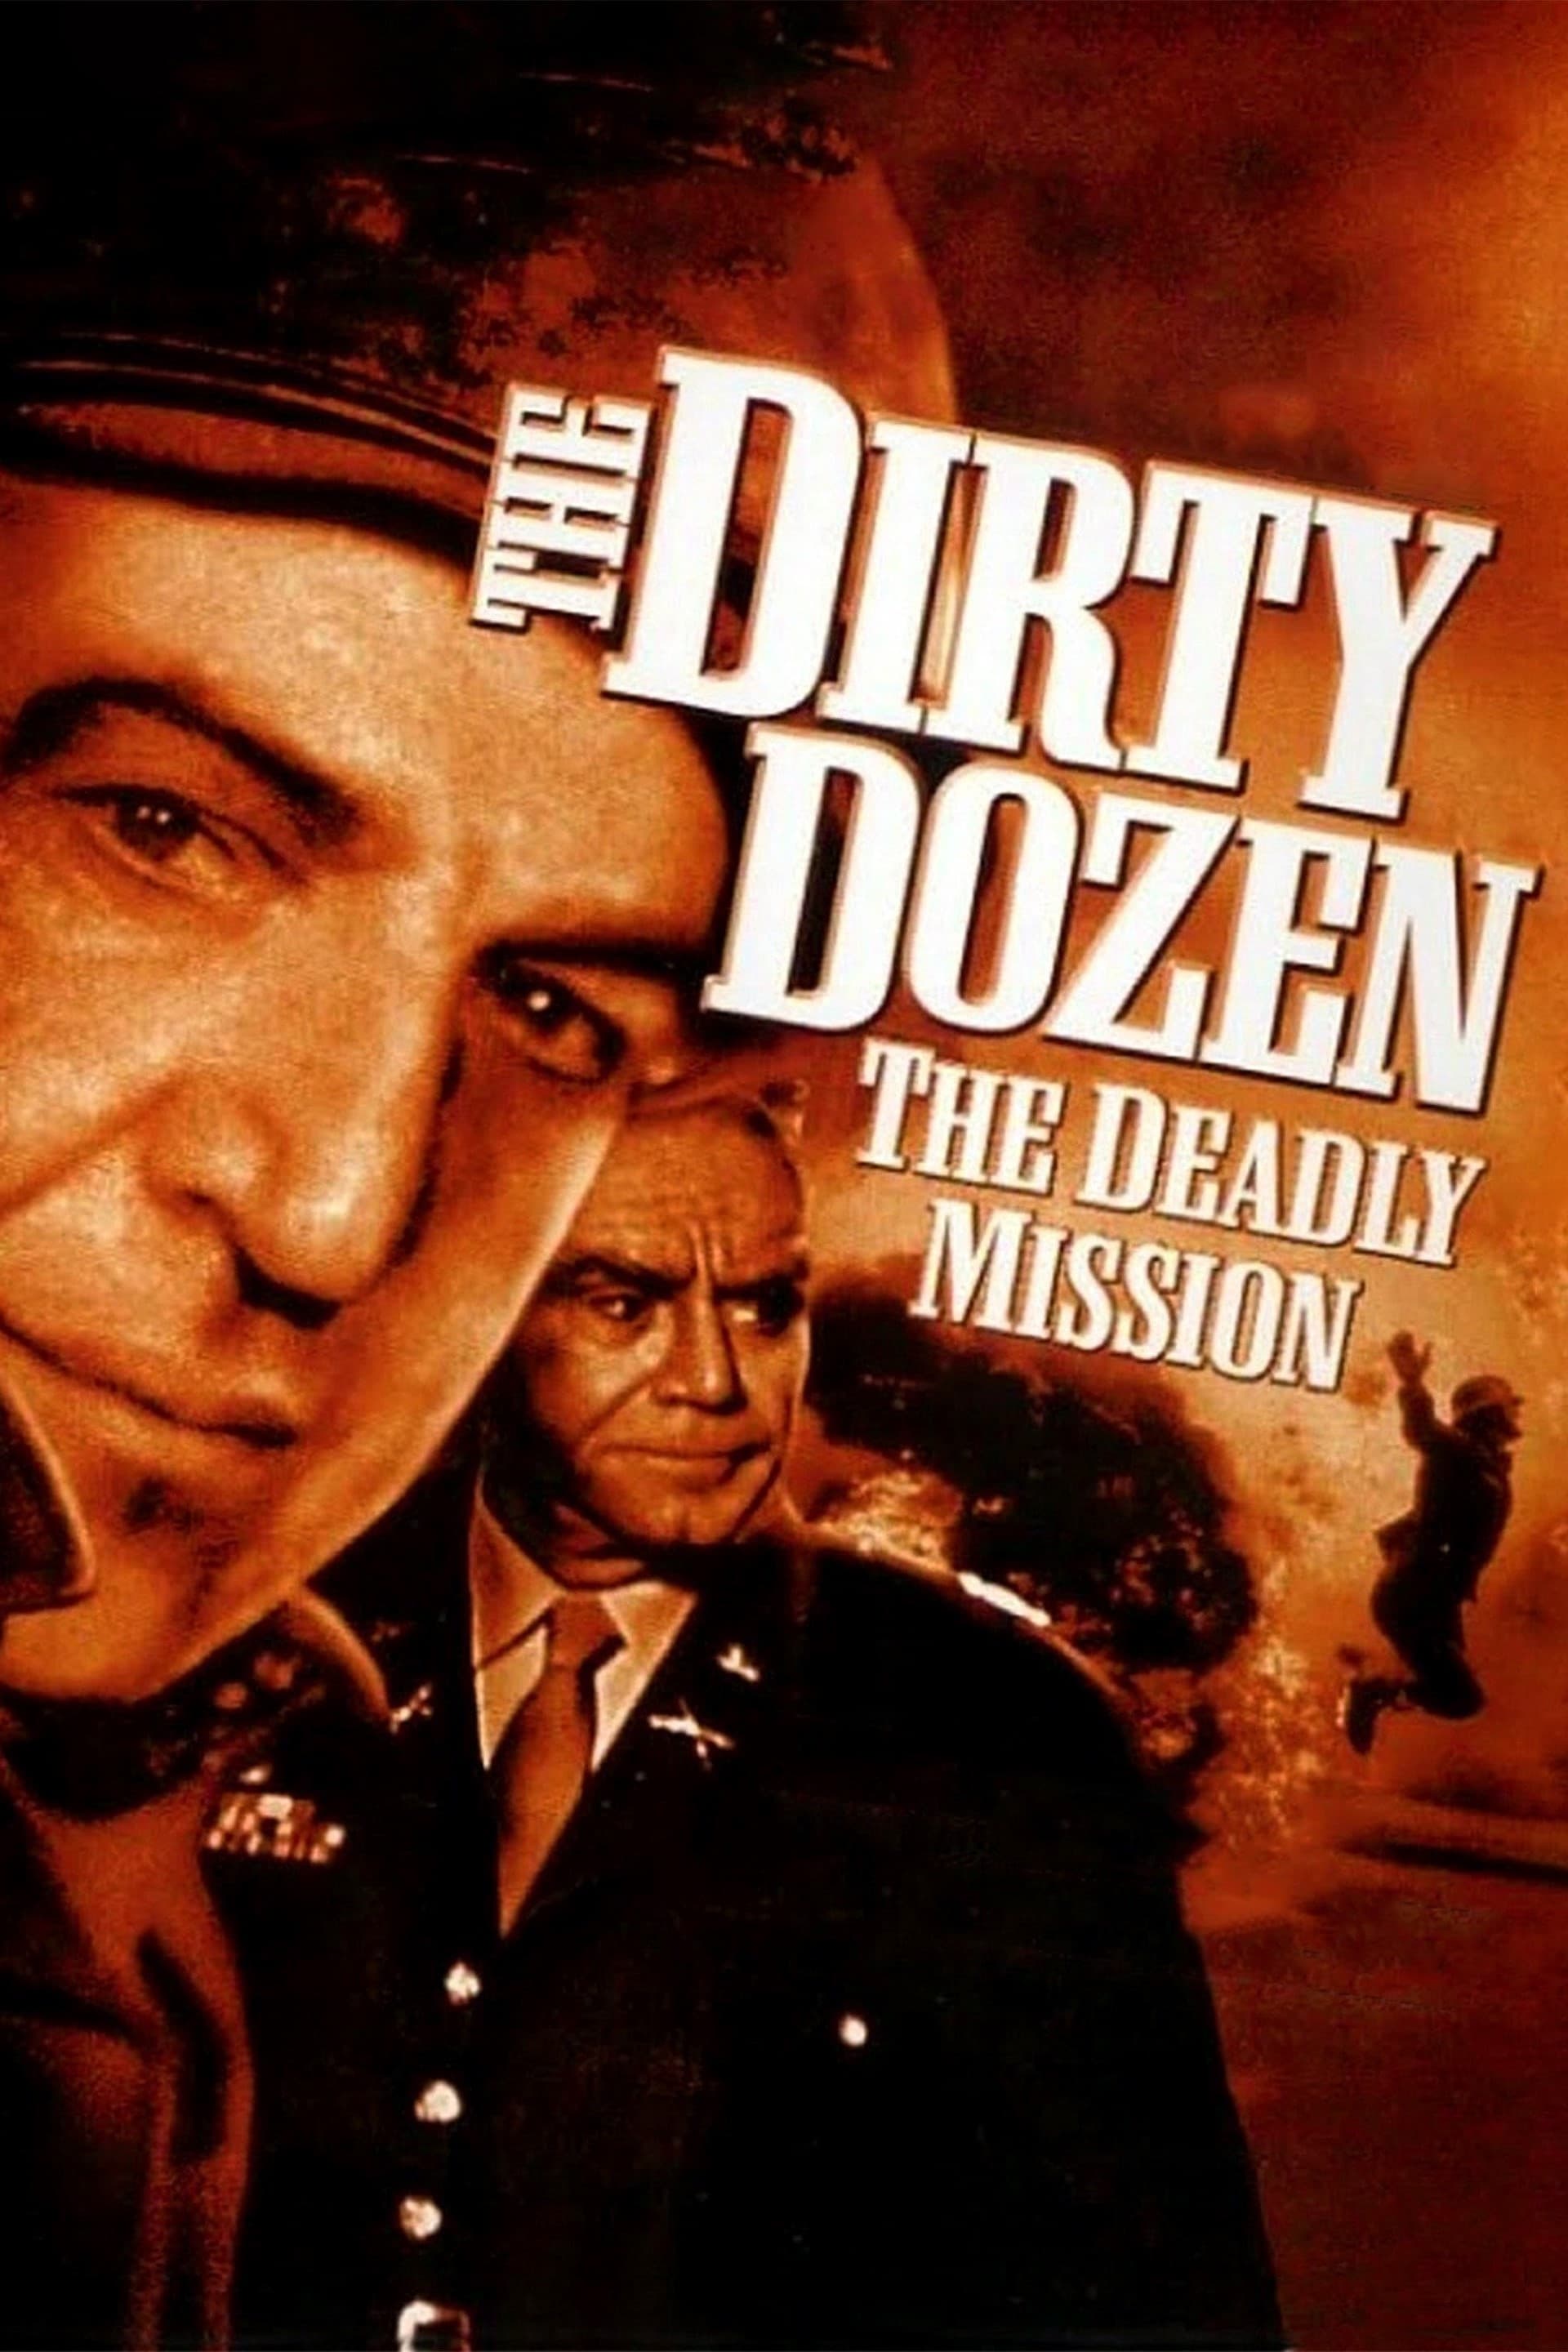 The Dirty Dozen: The Deadly Mission (1987)